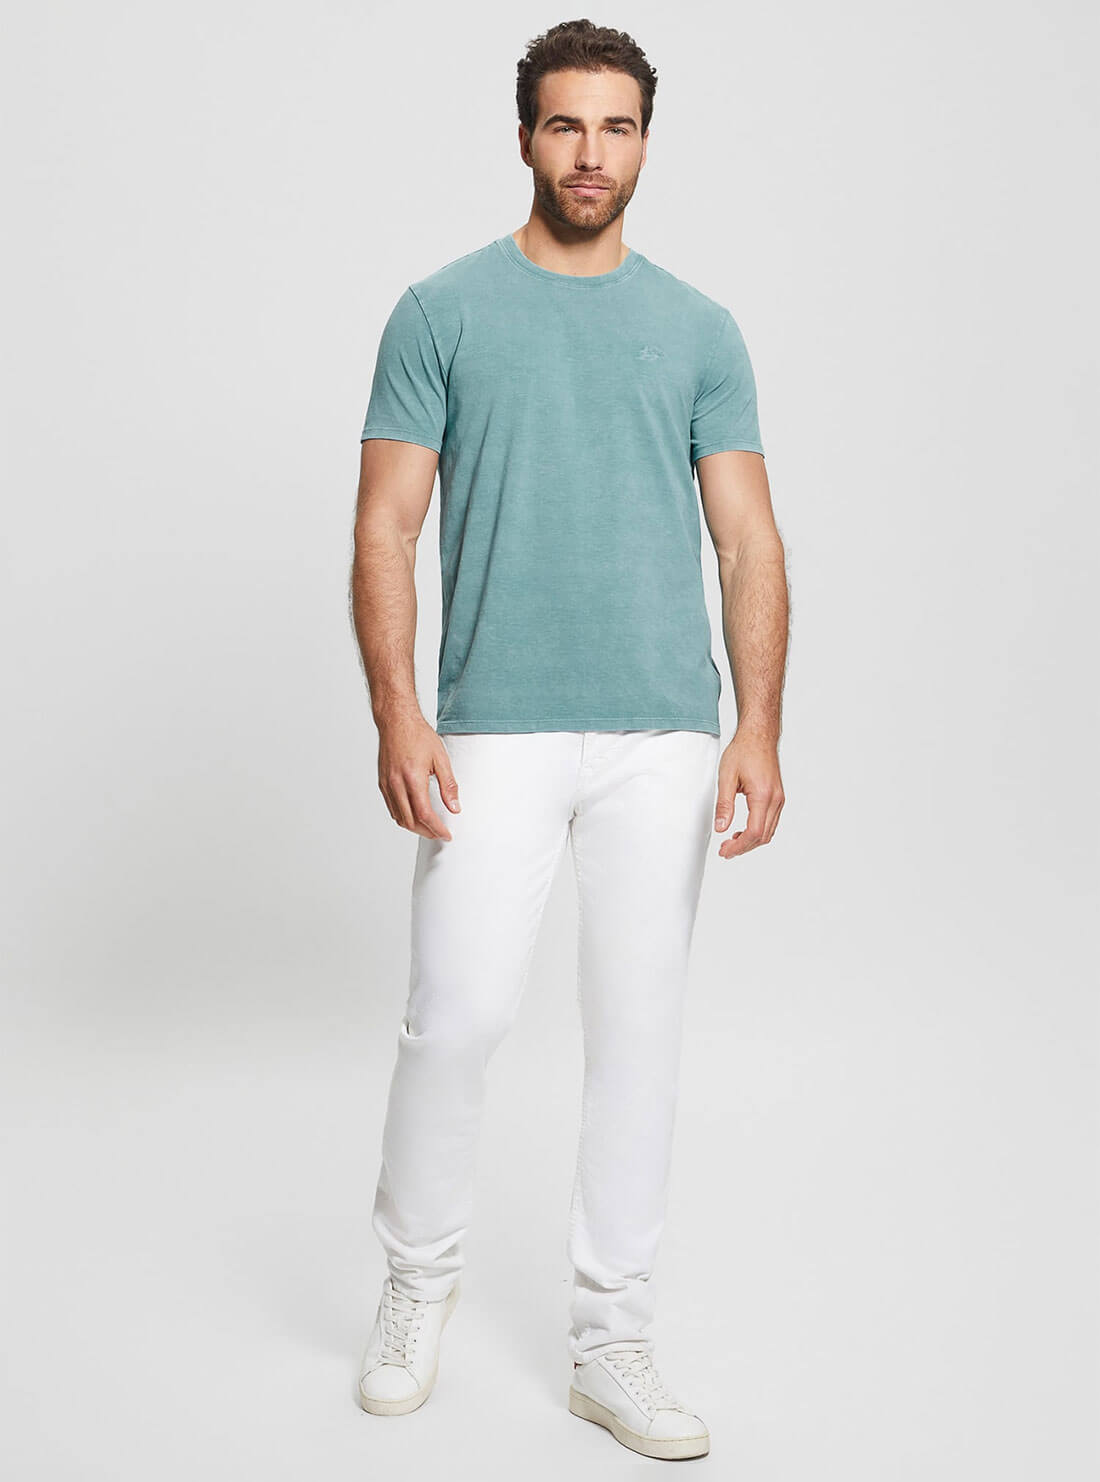 Teal Blue Eli Washed T-Shirt | GUESS Men's Apparel | full view